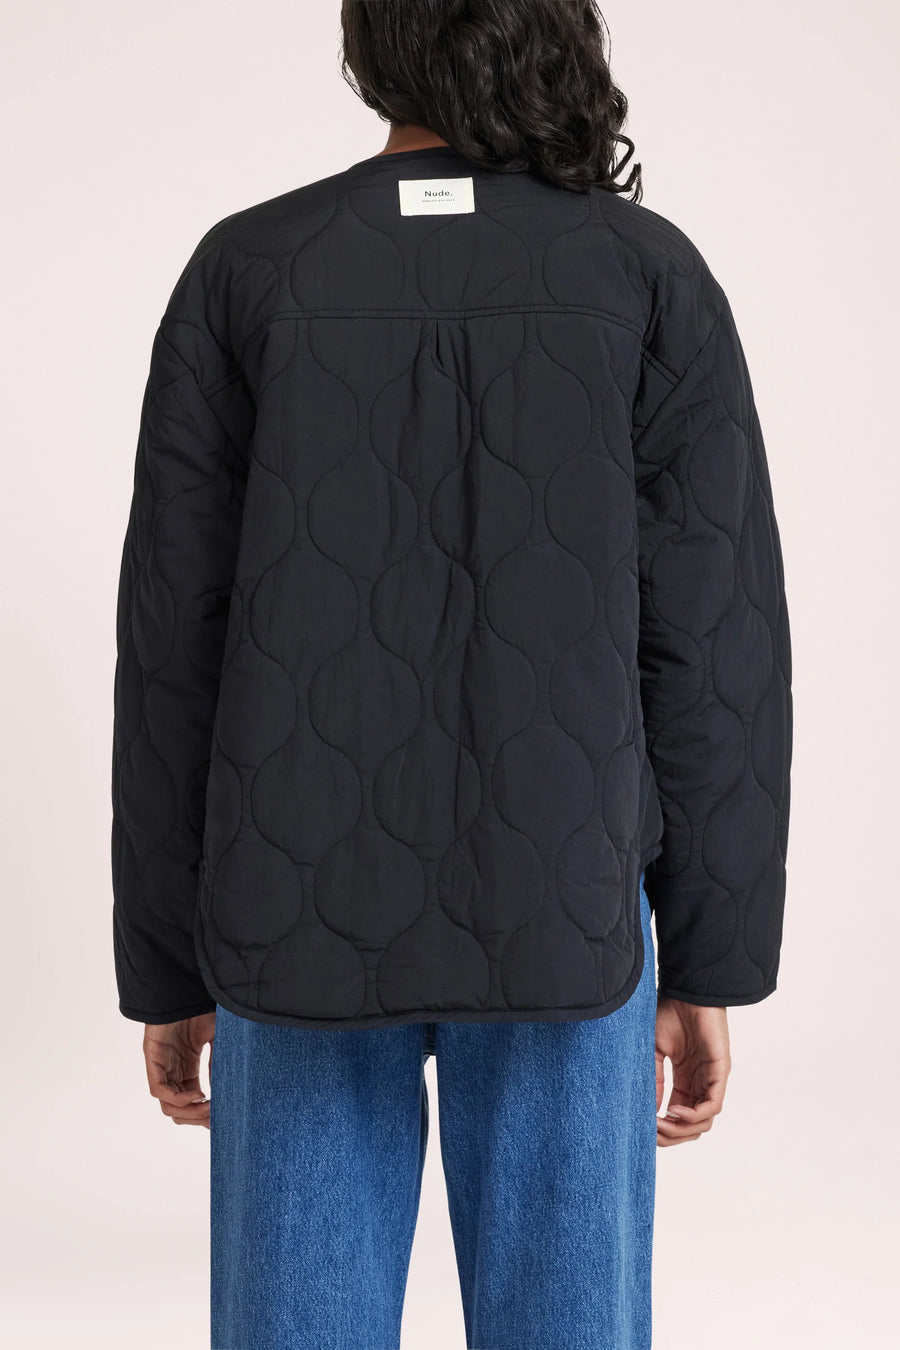 Nude Lucy Shiva Quilted Jacket Black